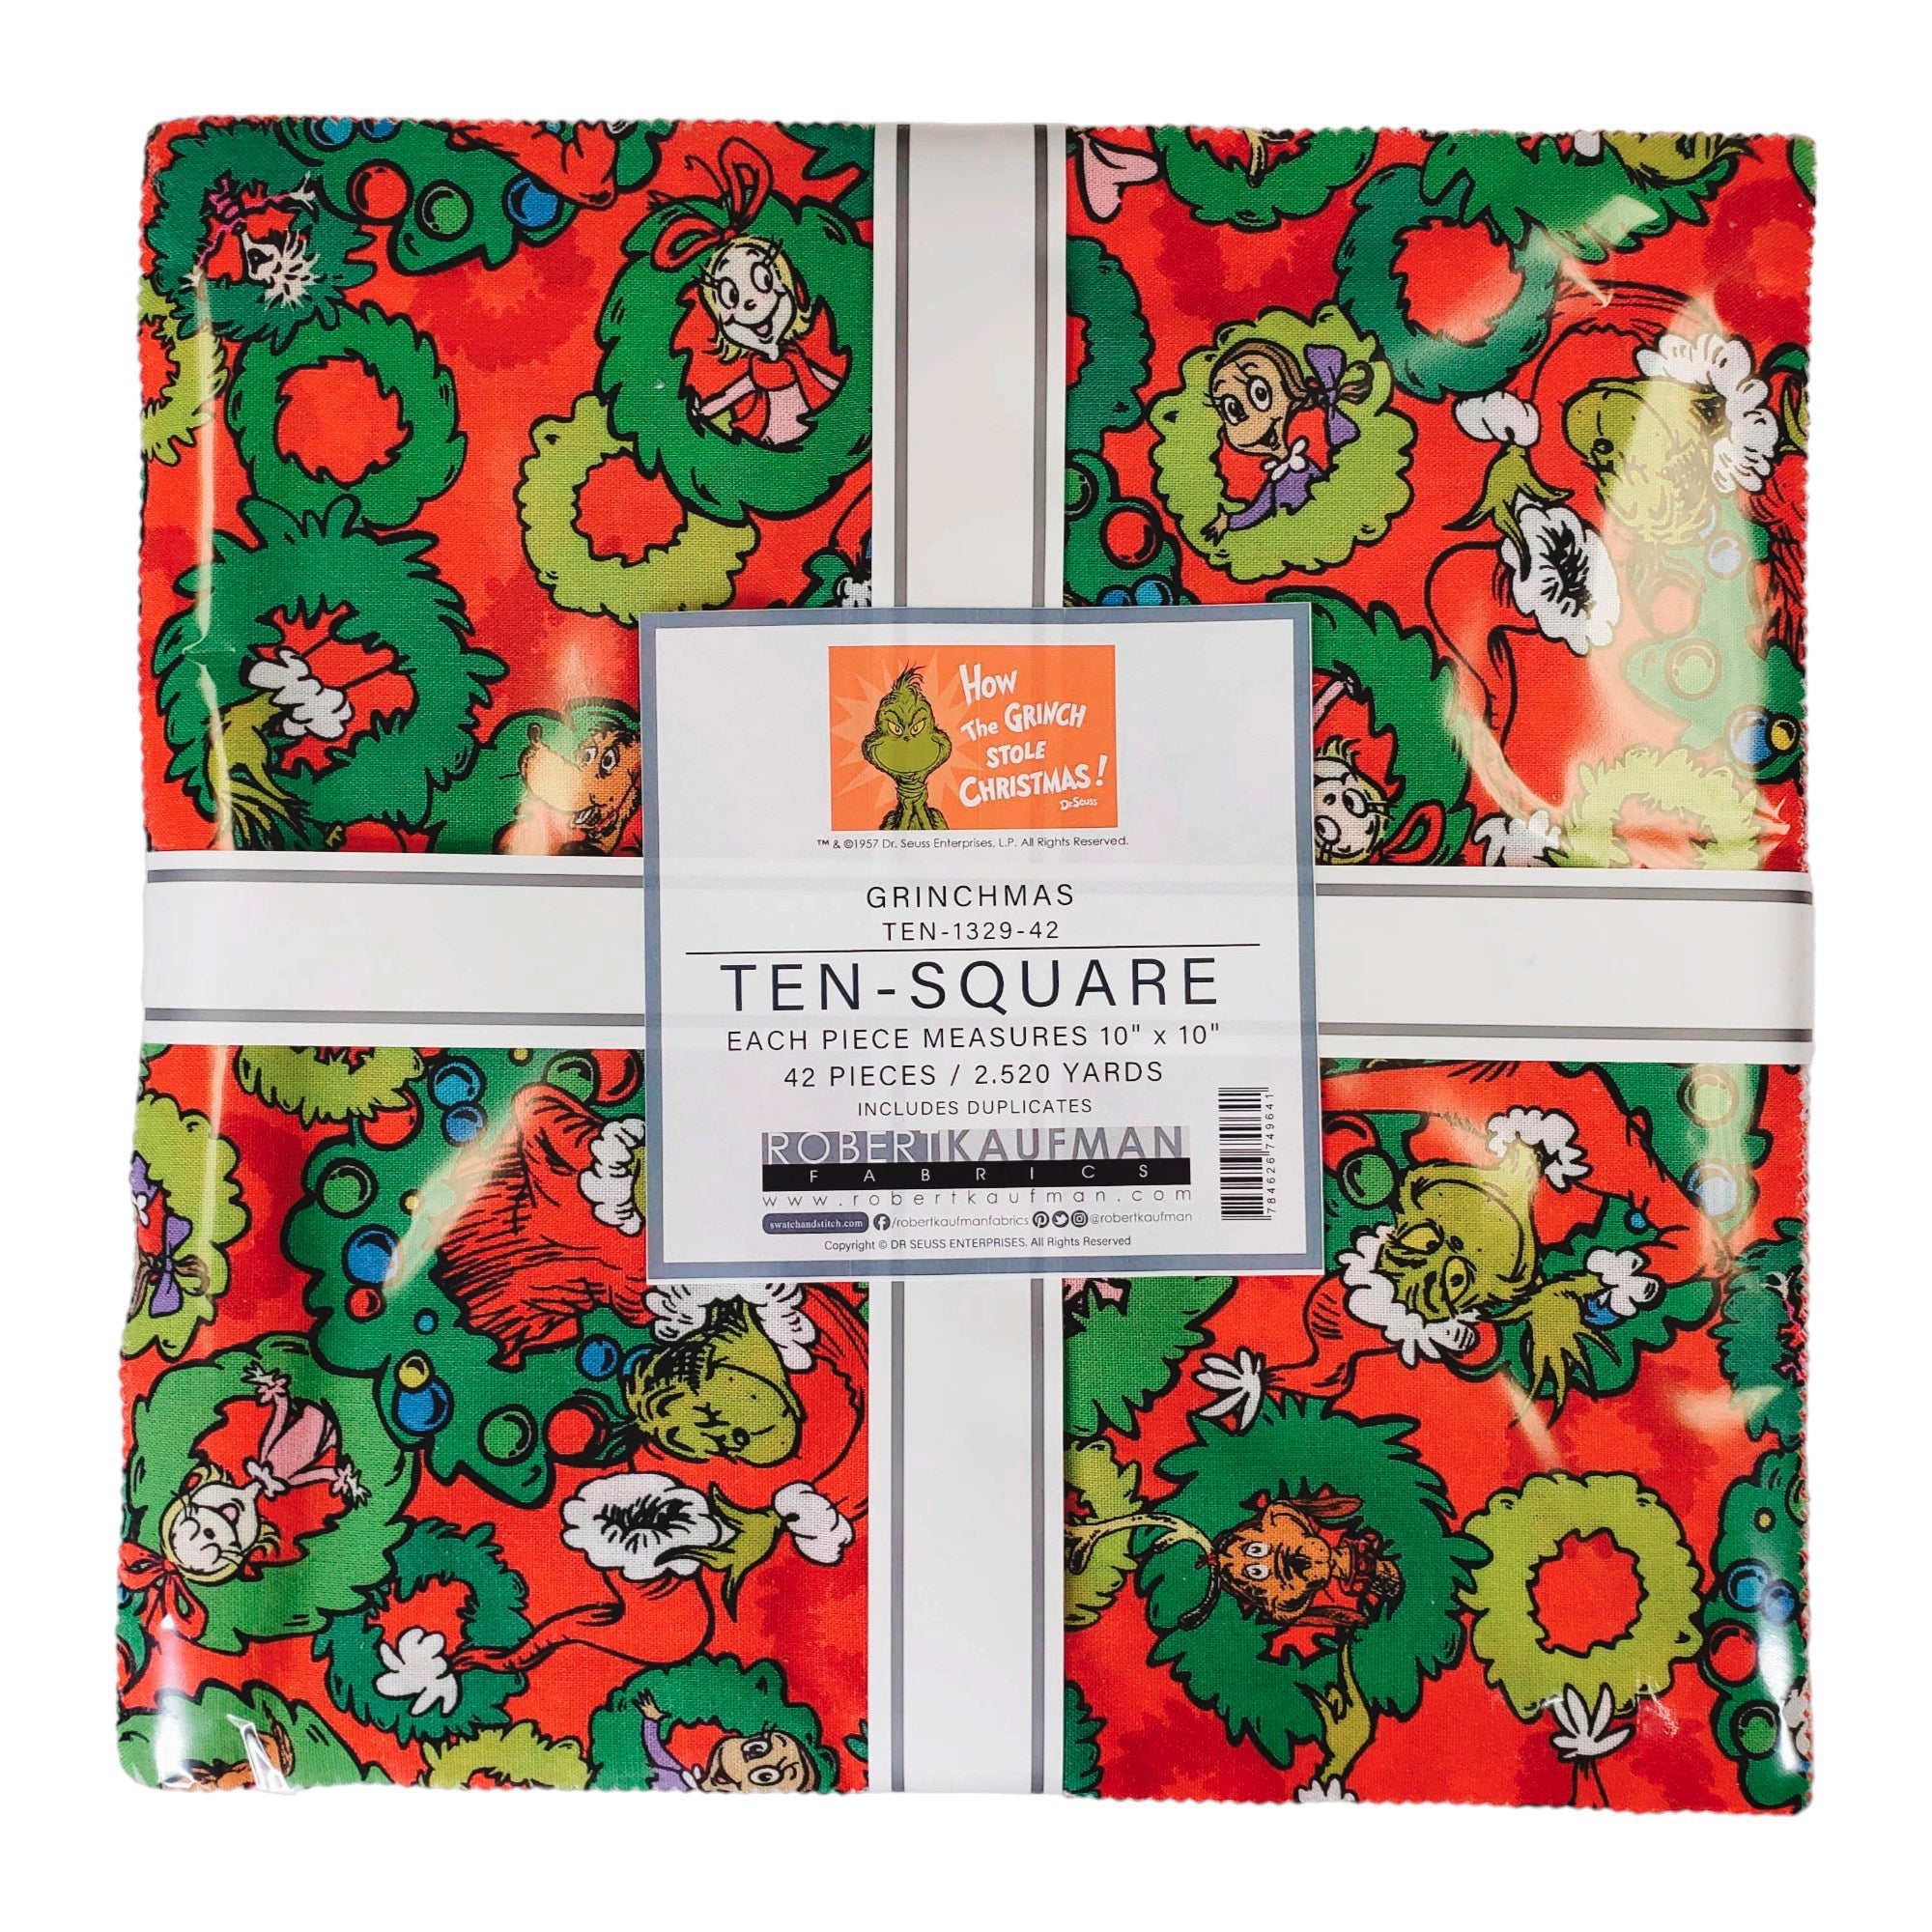 How The Grinch Stole Christmas Grinchmas 10" Squares